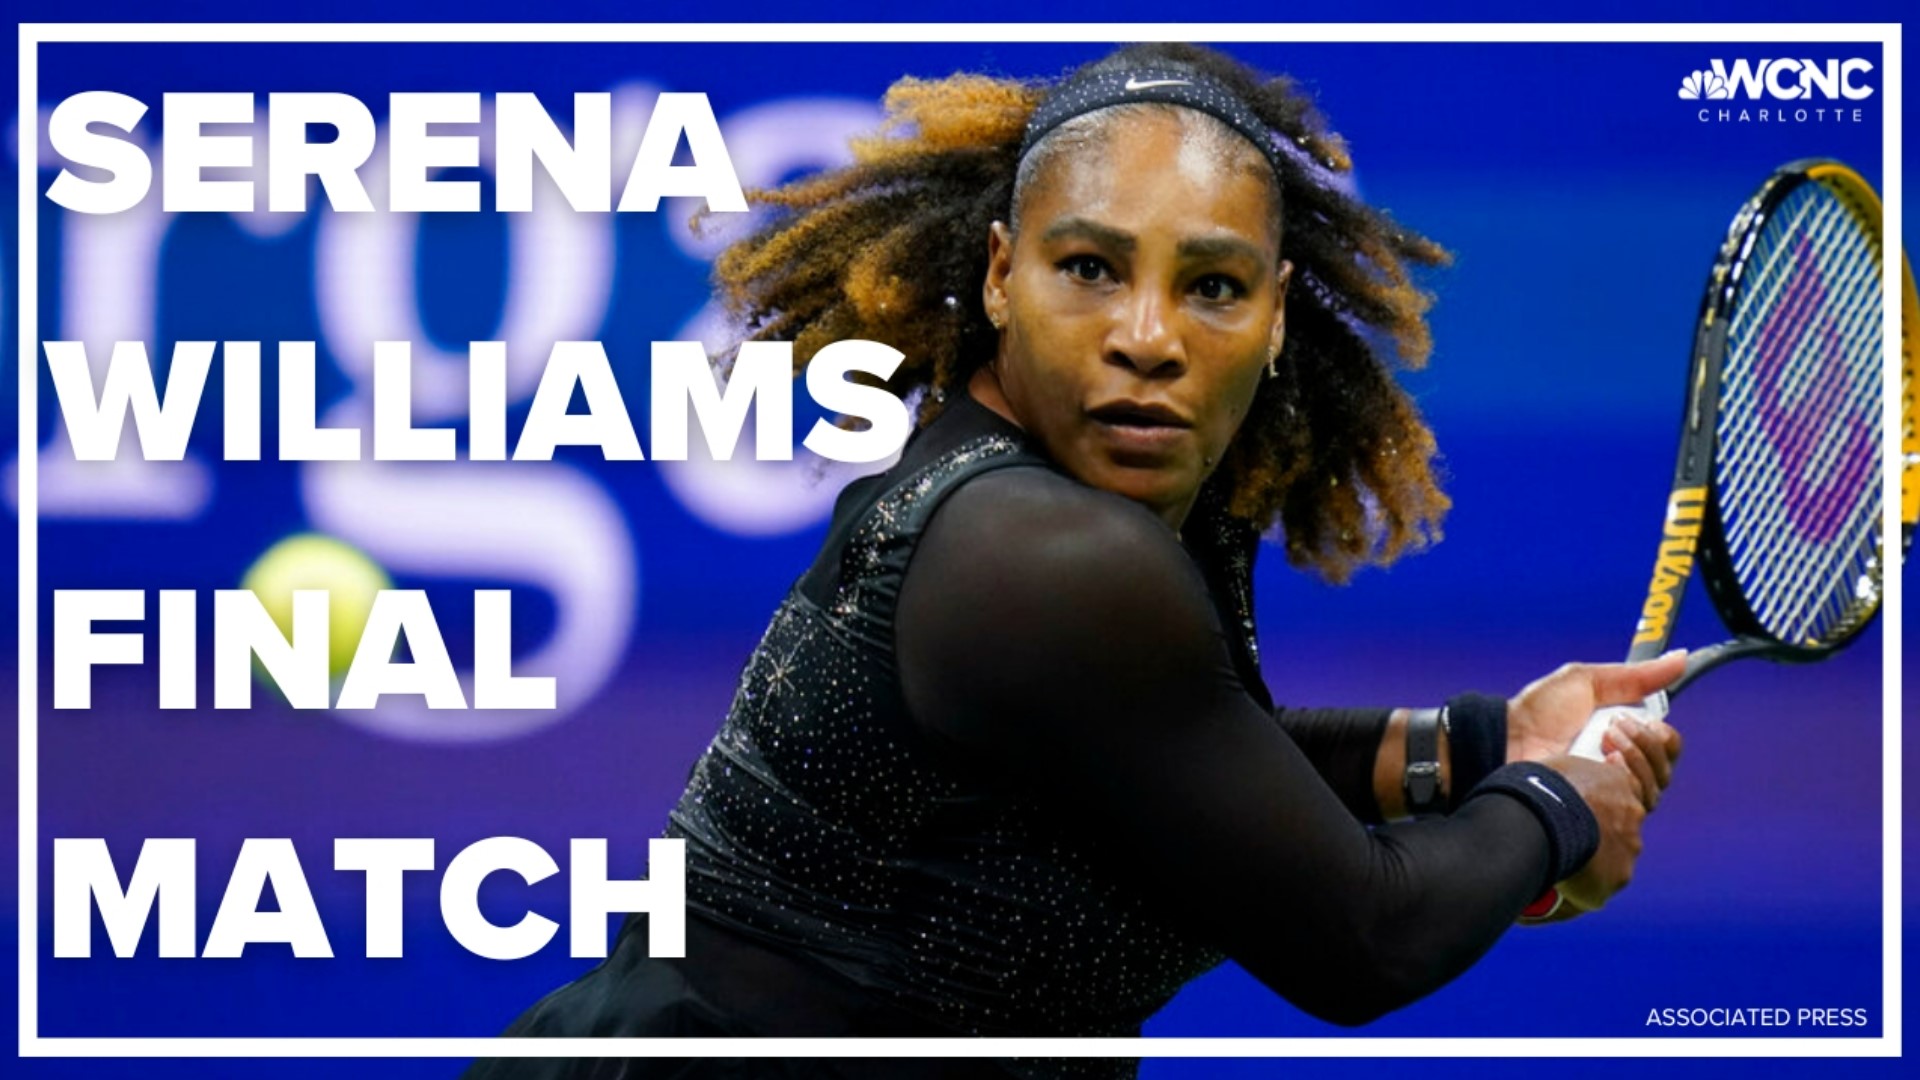 Did Serena Williams win at the US Open?